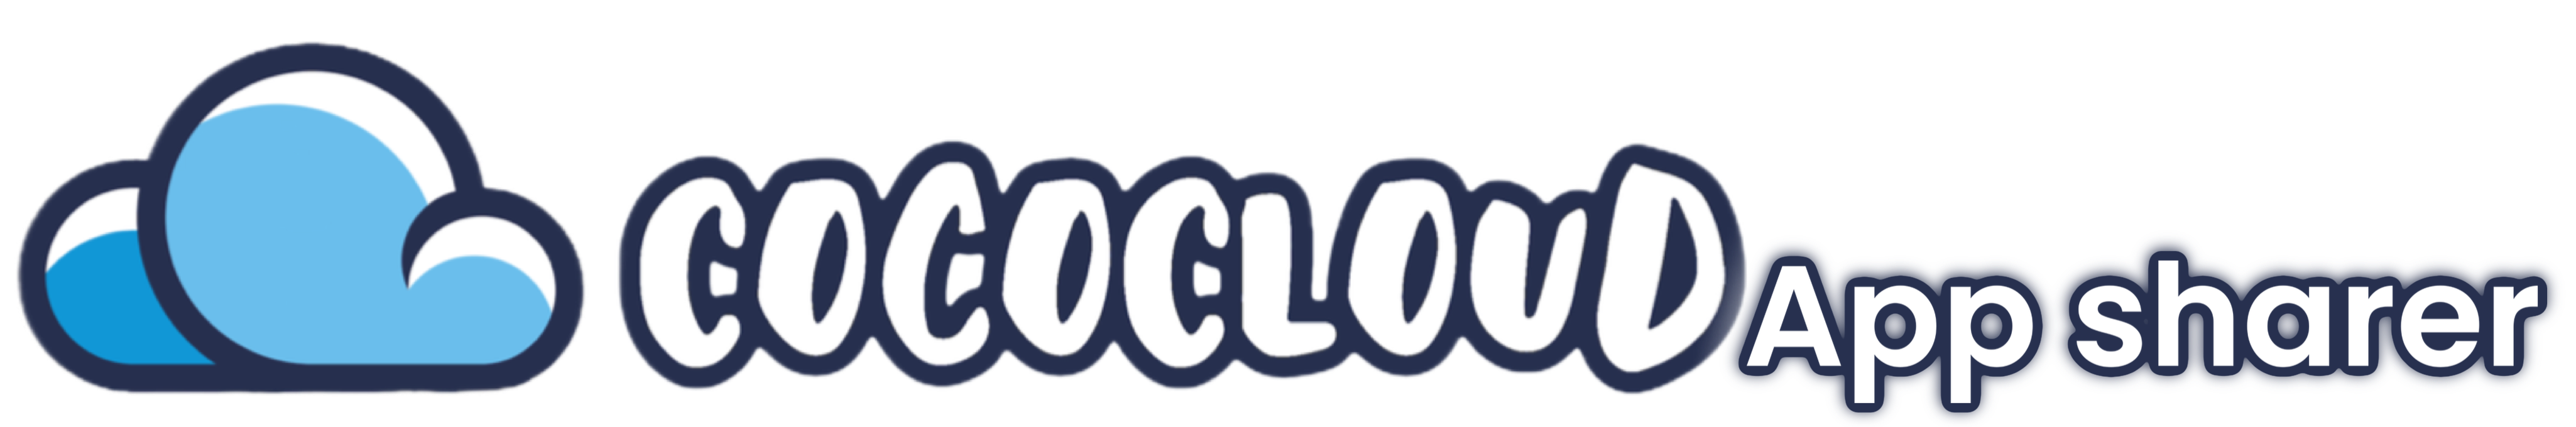 CocoCloud App Sharer